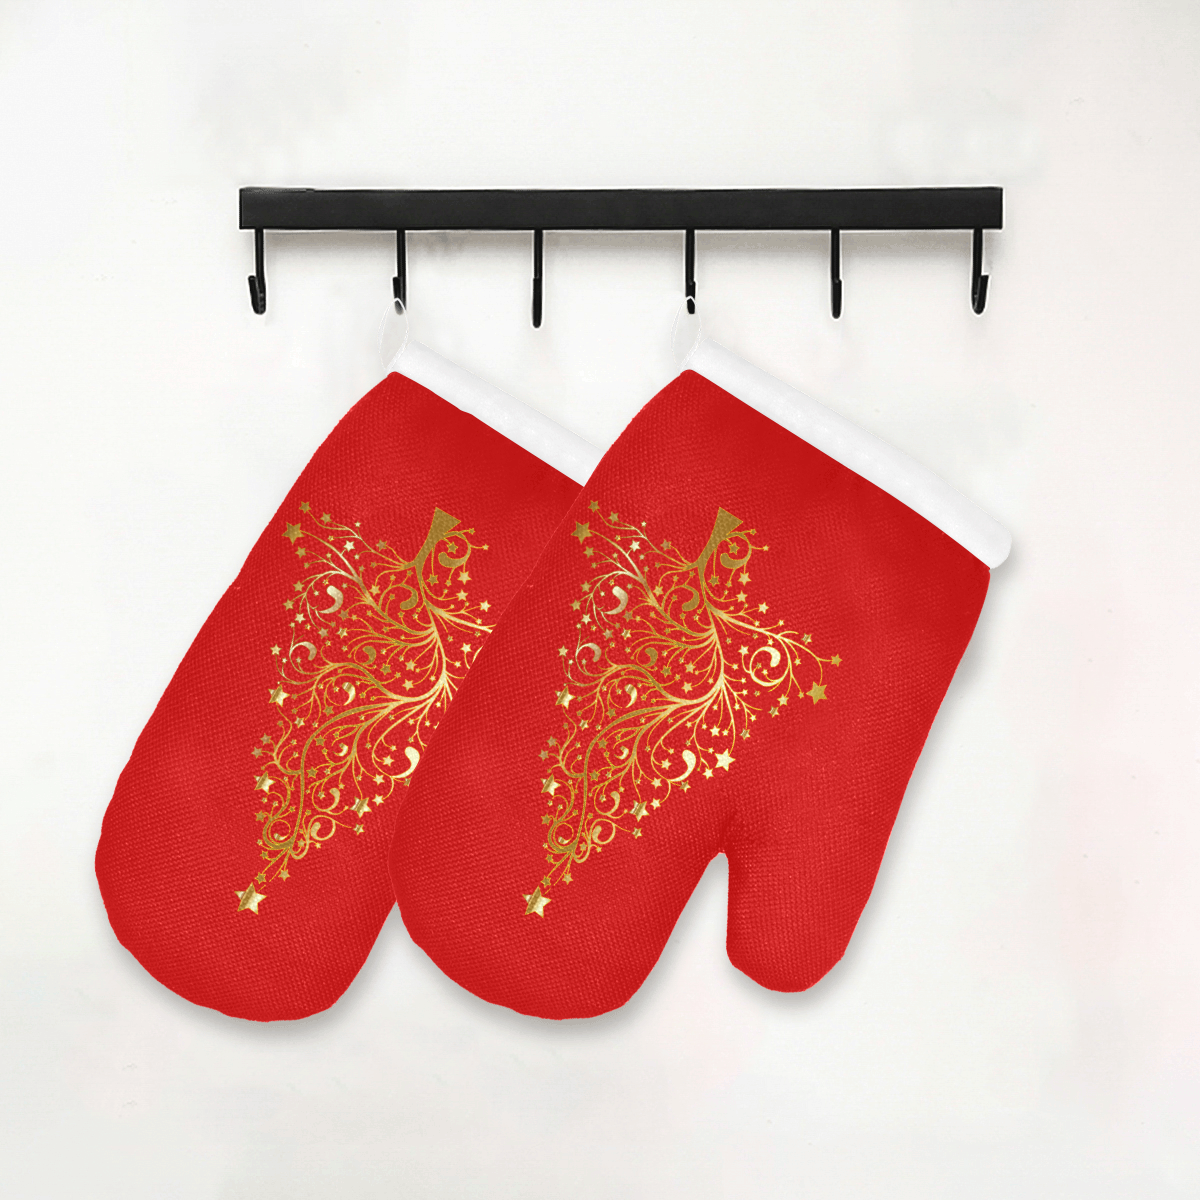 Golden Christmas Tree on Red Oven Mitt (Two Pieces)